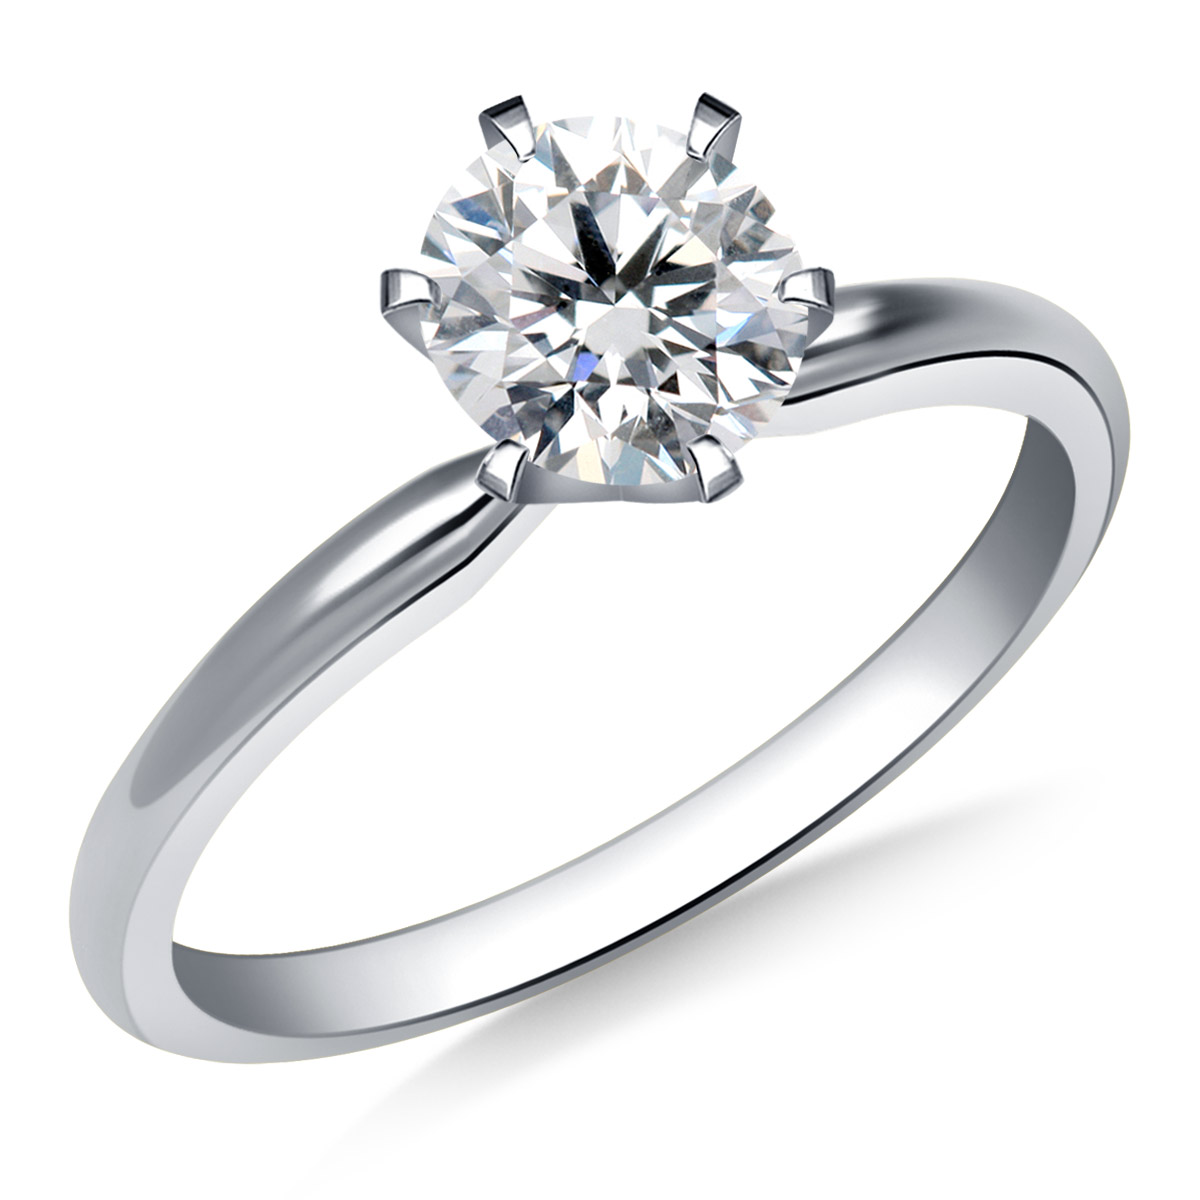 Six Prong Solitaire Diamond Engagement Ring in 14K White Gold (2.0 mm)